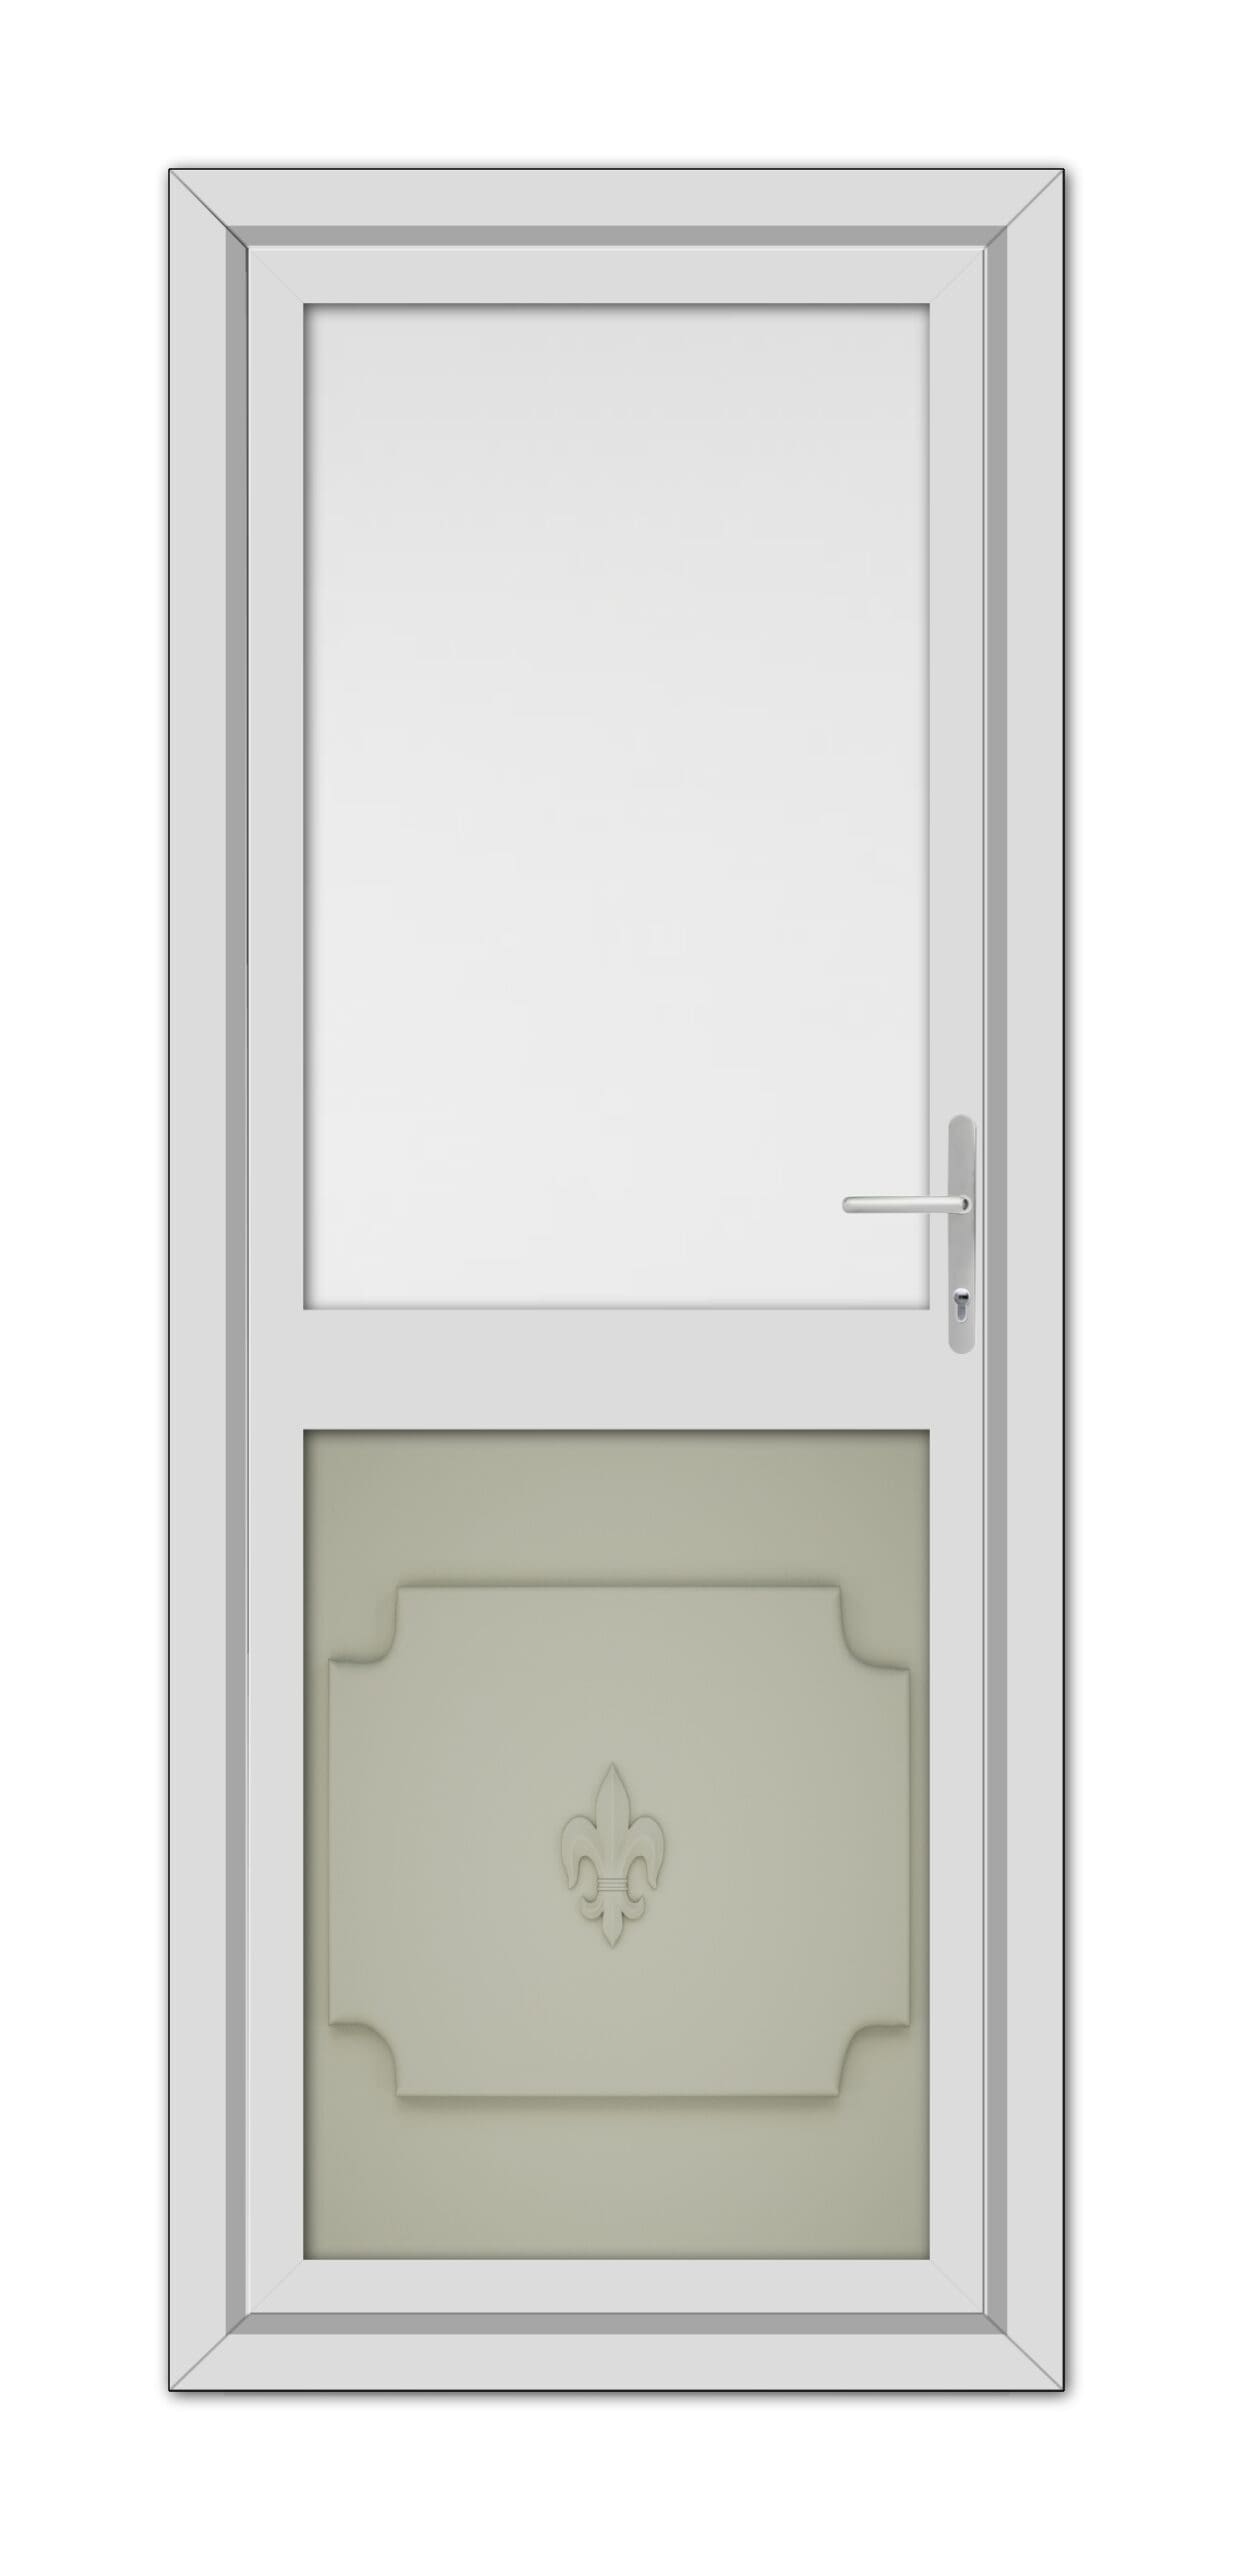 A modern white Agate Grey Abbey Half uPVC Back Door with a lower frosted glass pane featuring a decorative fleur-de-lis design, complete with a handle on the right side.